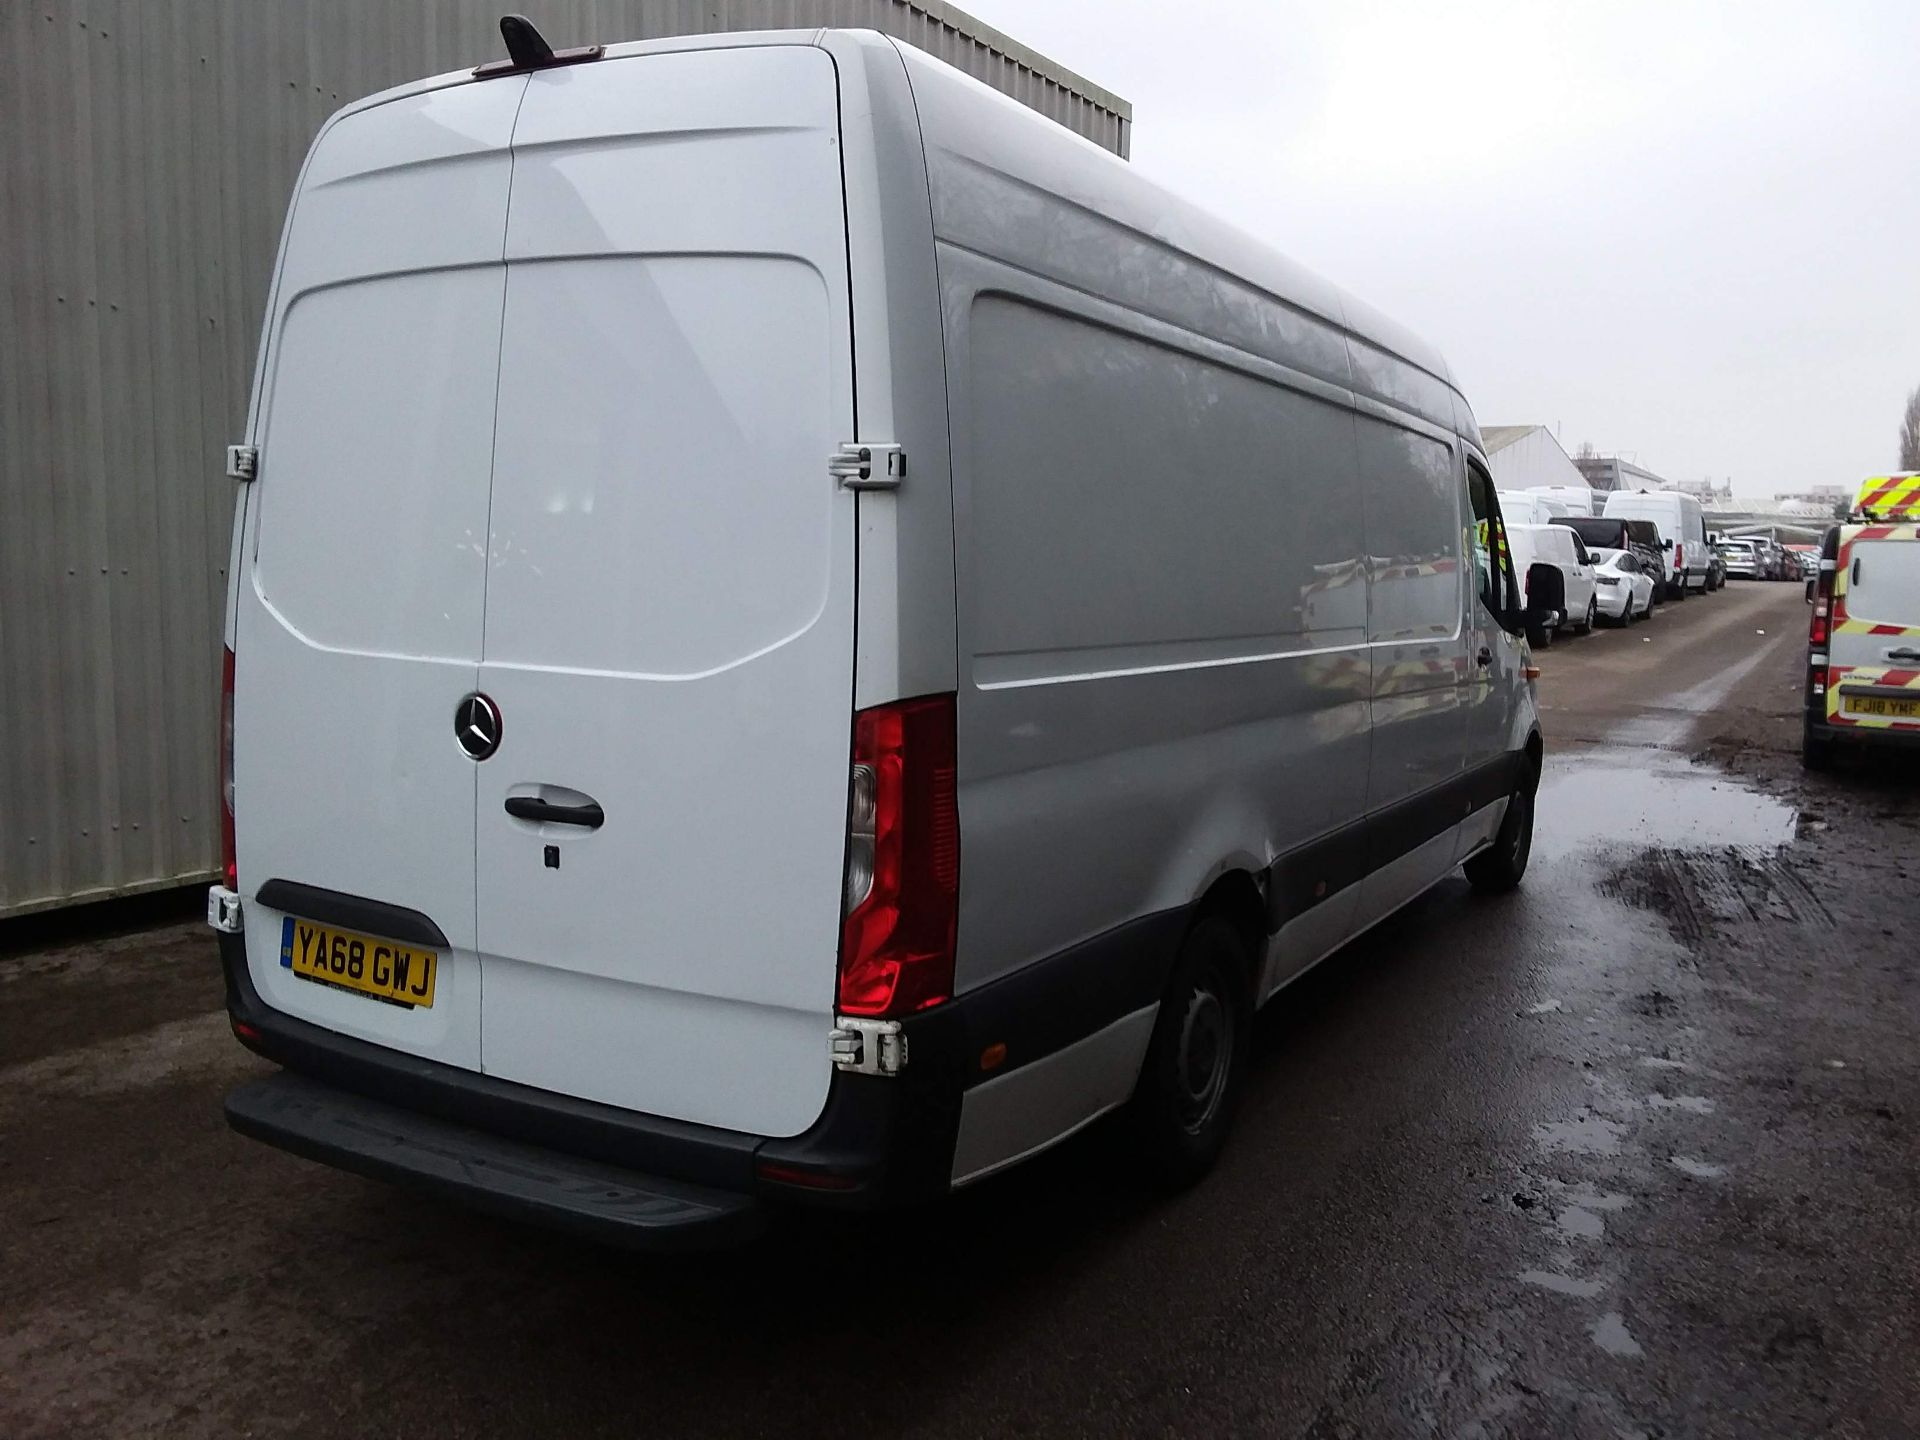 MERCEDES SPRINTER CDI "LWB HIGH ROOF" 2019 MODEL - ONLY 50K MILES!! CRUISE CONTROL (NEW SHAPE) - Image 8 of 12